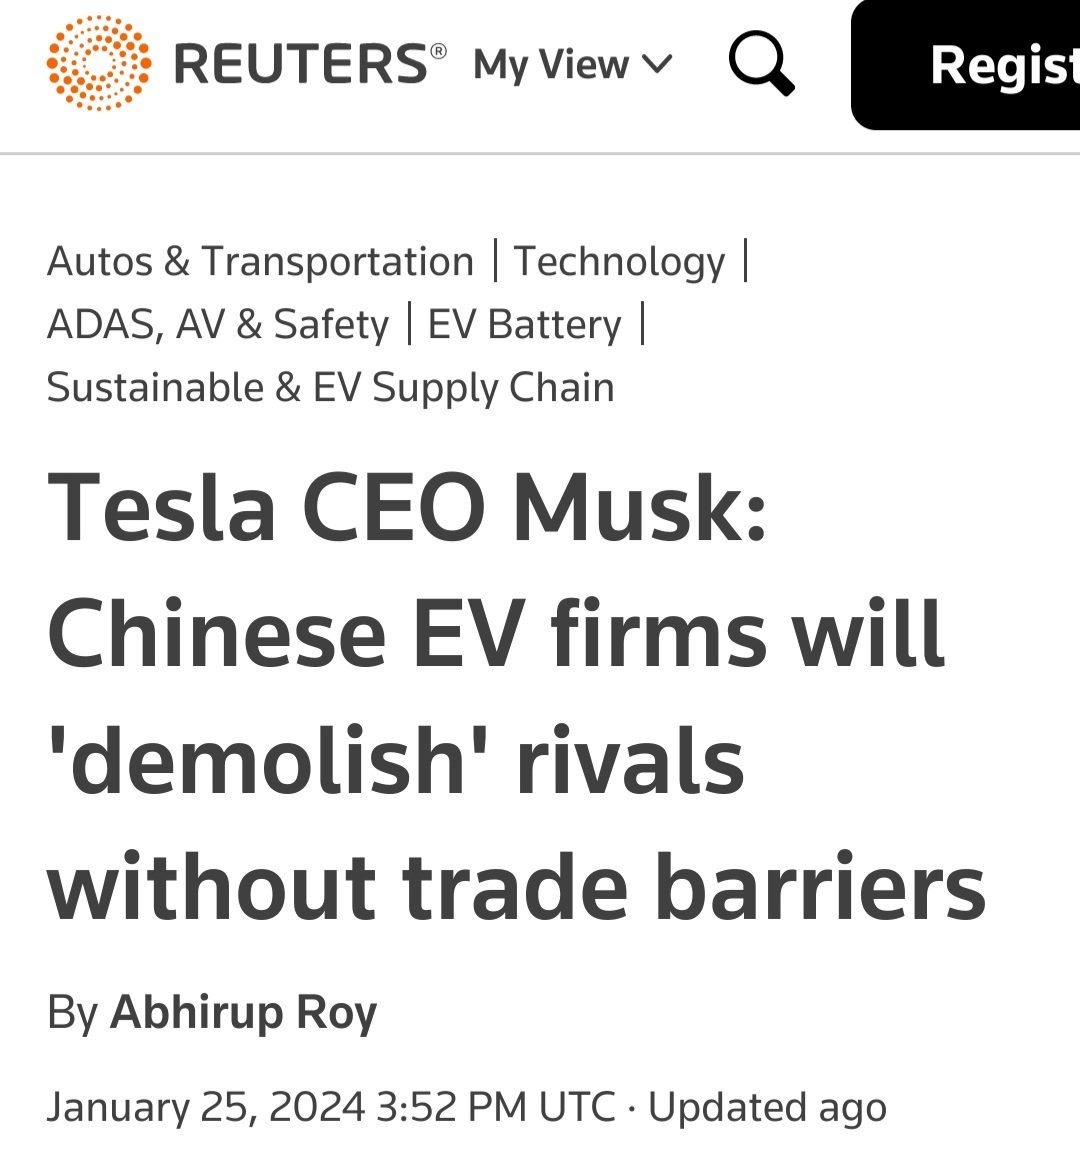 The US is raising tariffs on Chinese electric vehicles from 25% to 100% (after our billionaire oligarch overlord demanded them). 'Free trade' was always a myth. Economic powers only preach it after establishing hegemony. When they lose dominance, they return to protectionism.